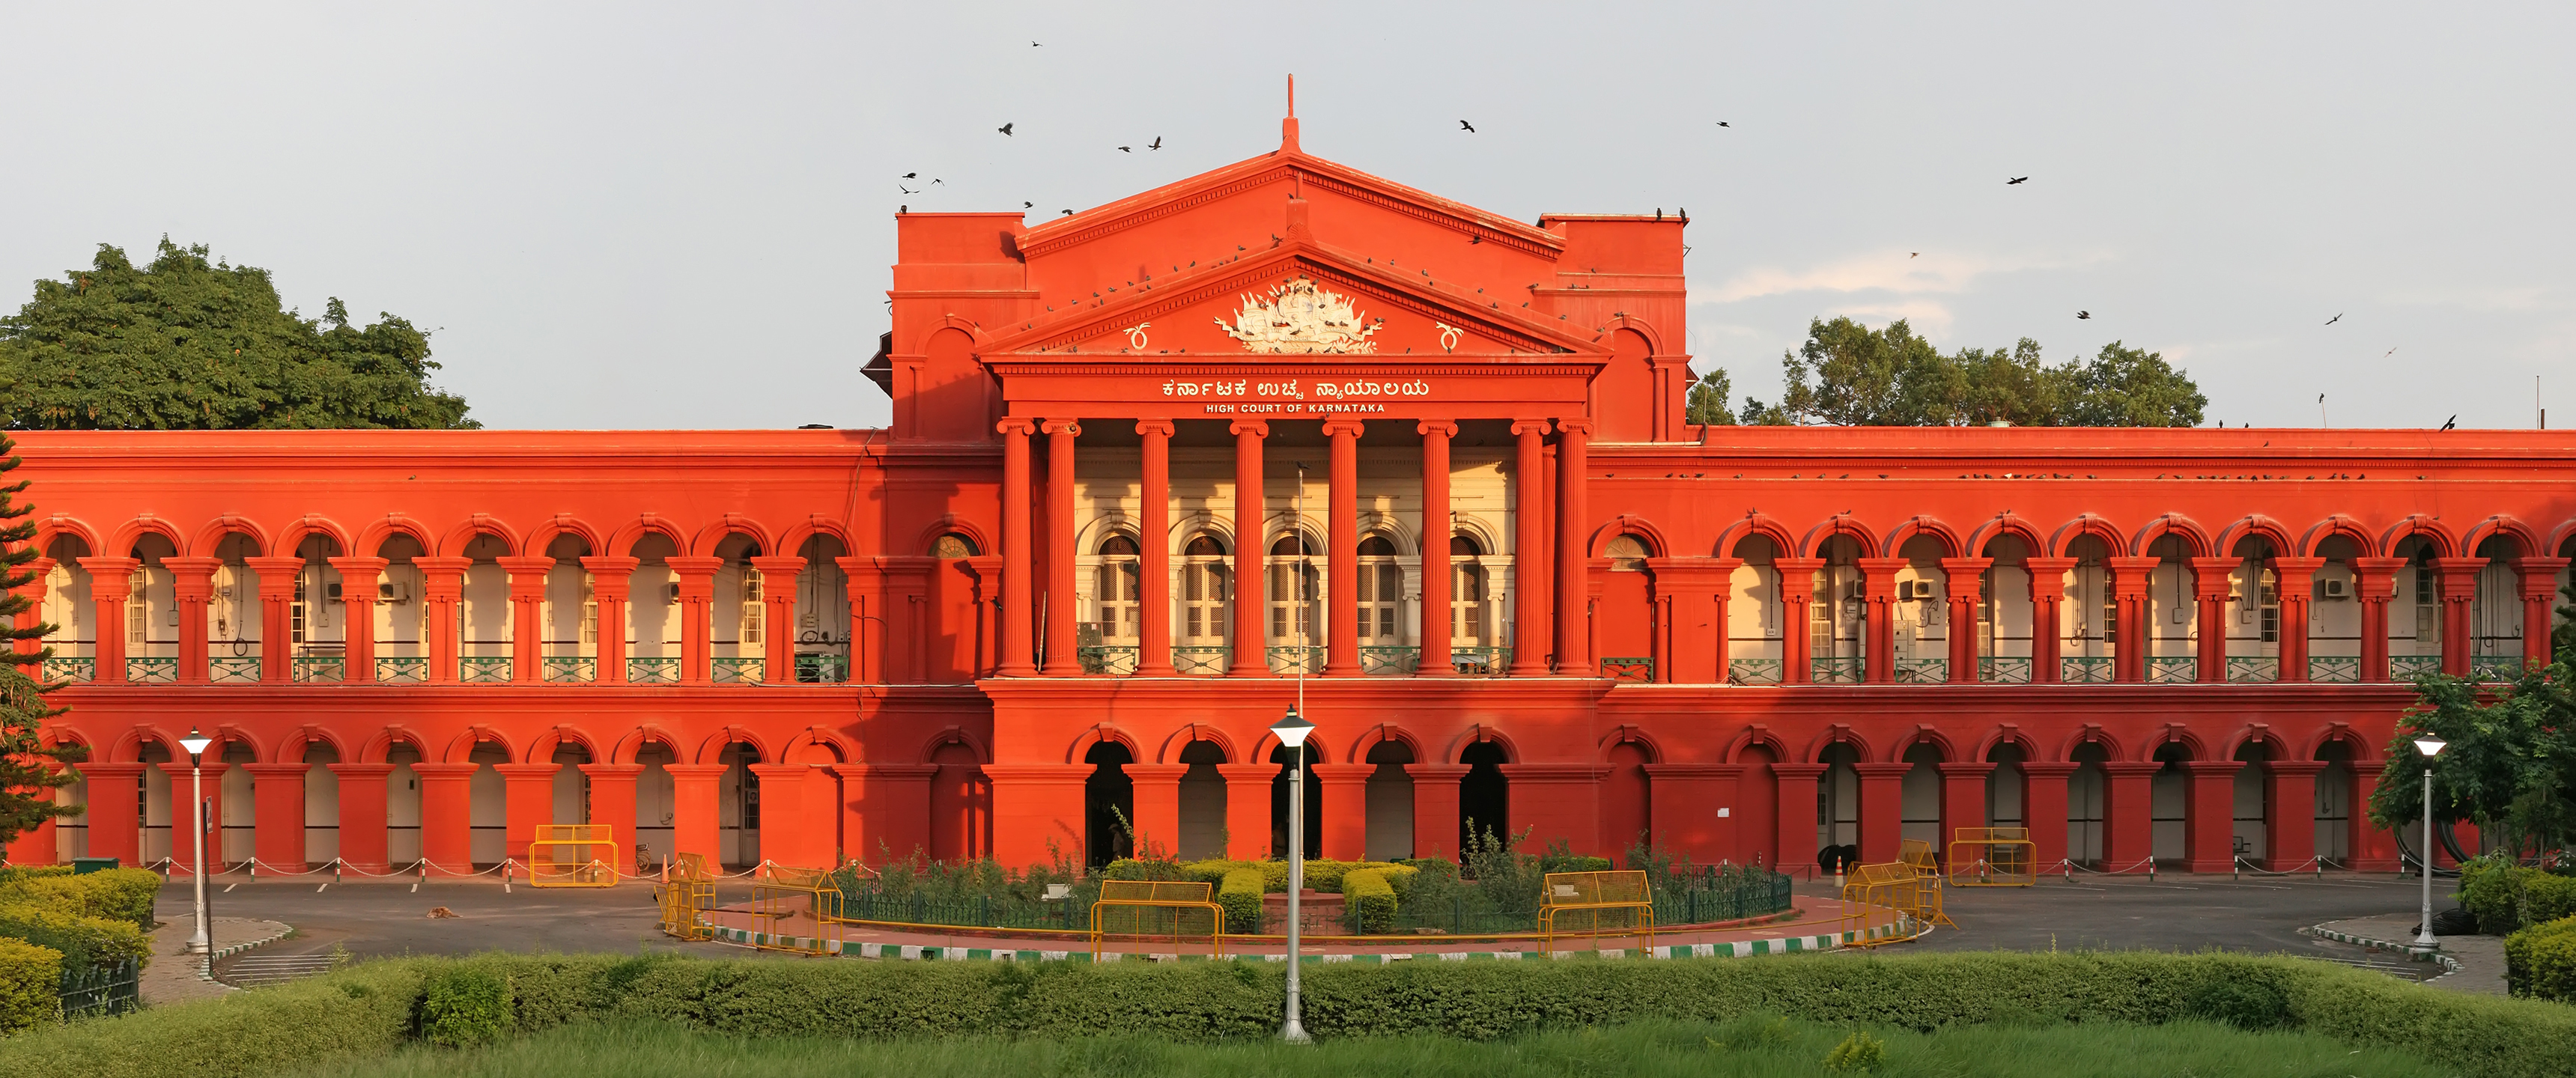 General 3440x1440 ultrawide photography building India